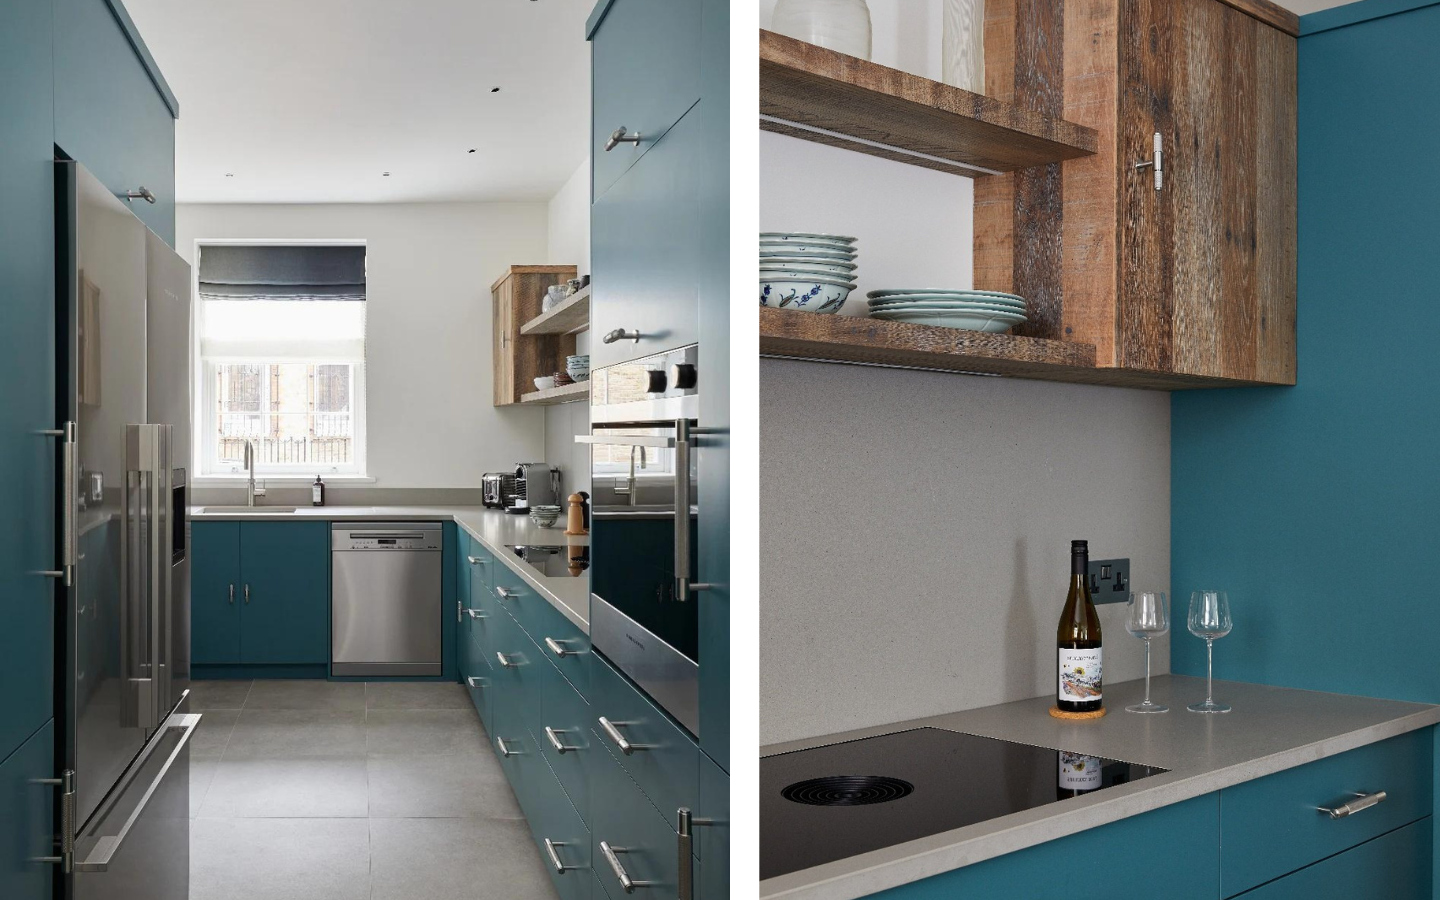 New kitchen in Swan Cottage in a beautiful blue with a concrete-style quartz worktop